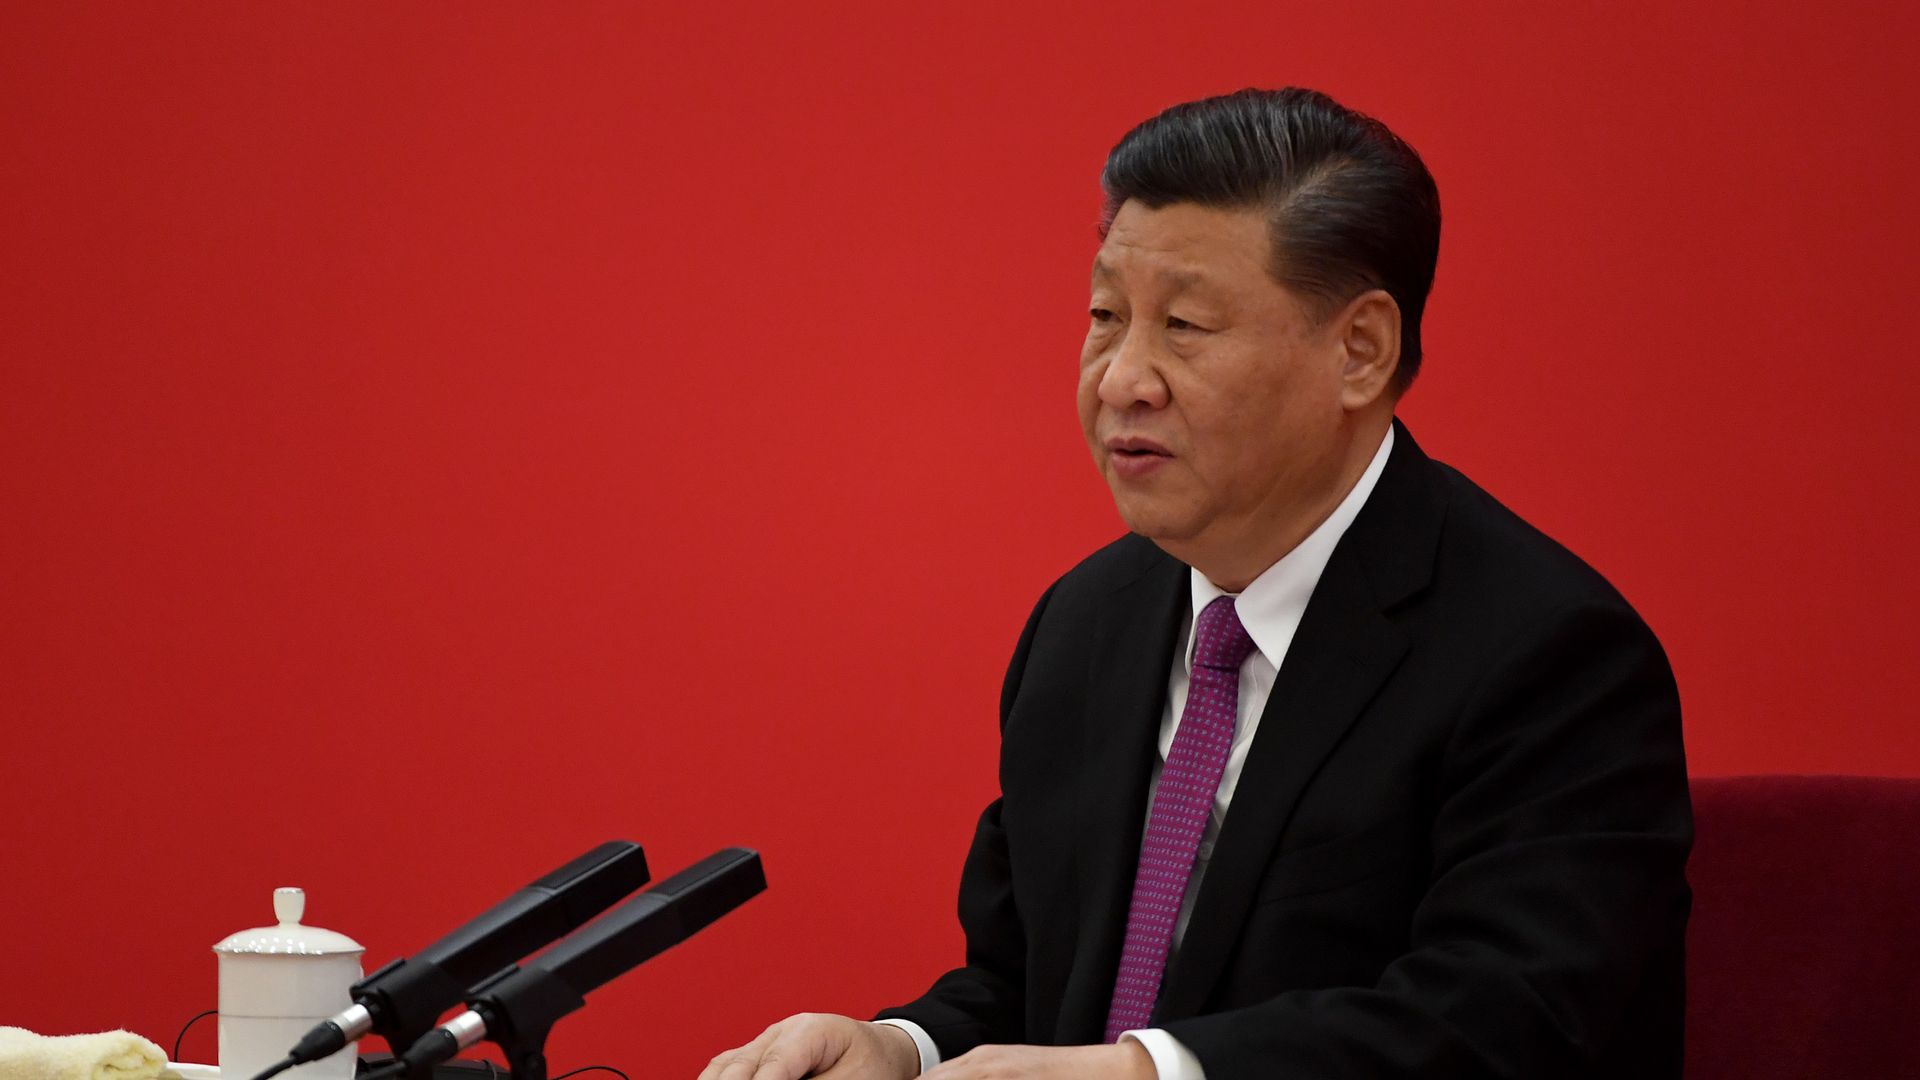 Chinese President Xi Jinping will not be attending the G20 Summit, even as his country faces economic and political stress.